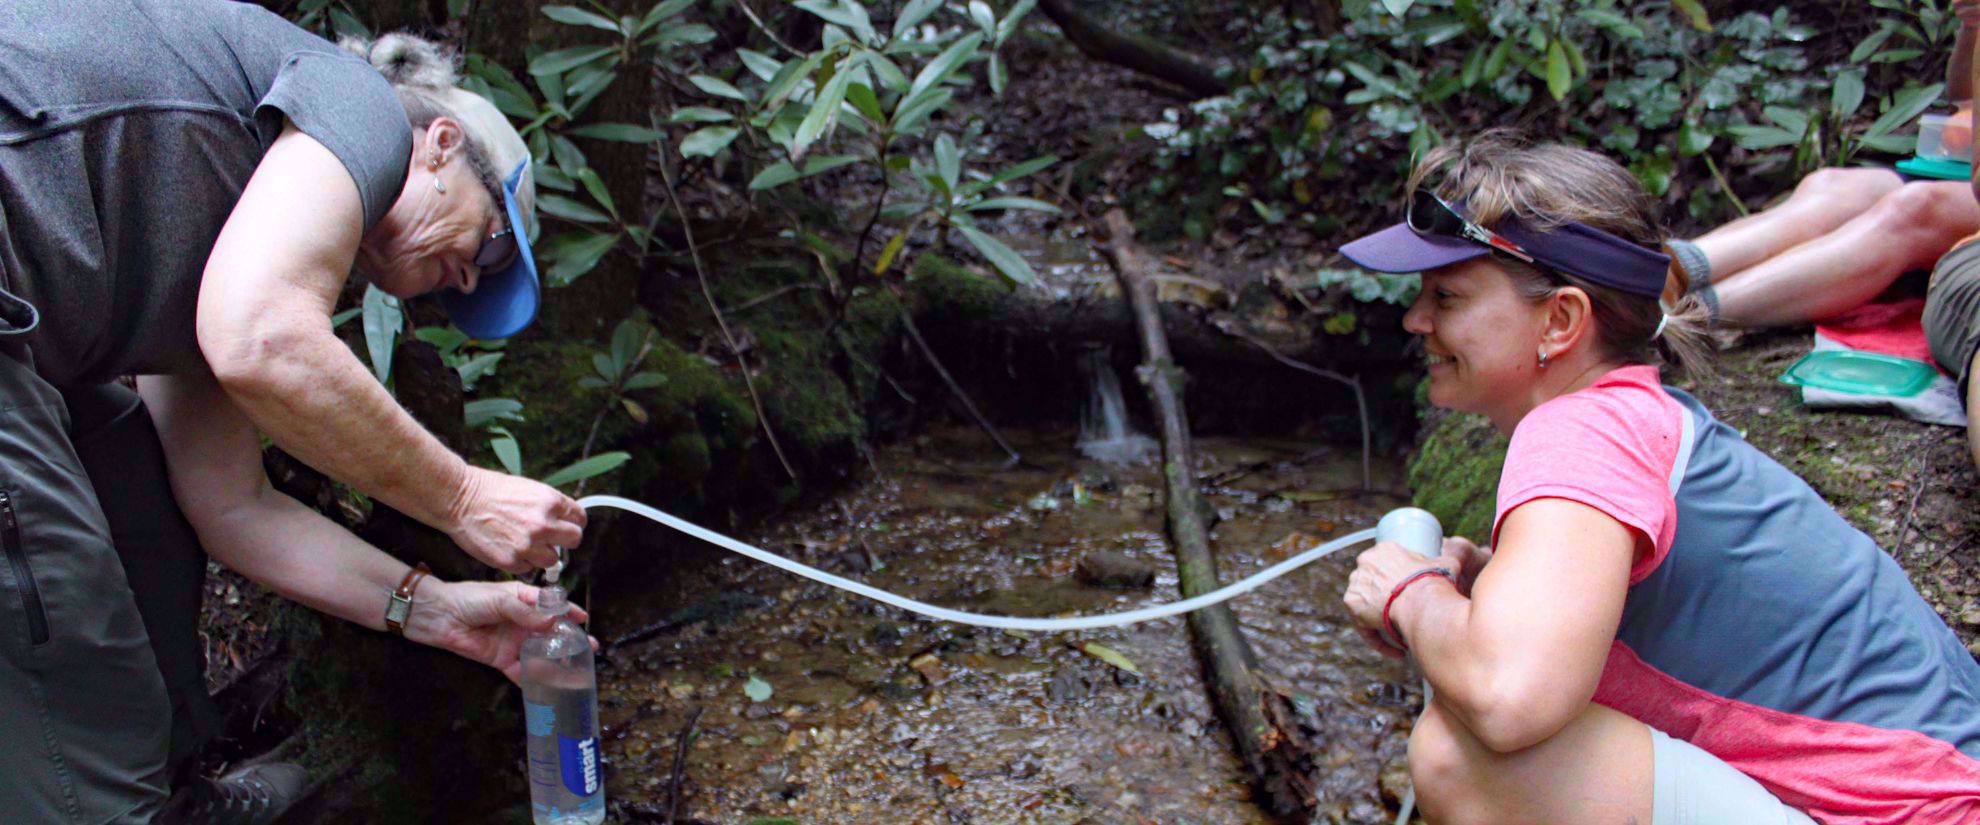 purifying water on group travel tour though appalachian mountains